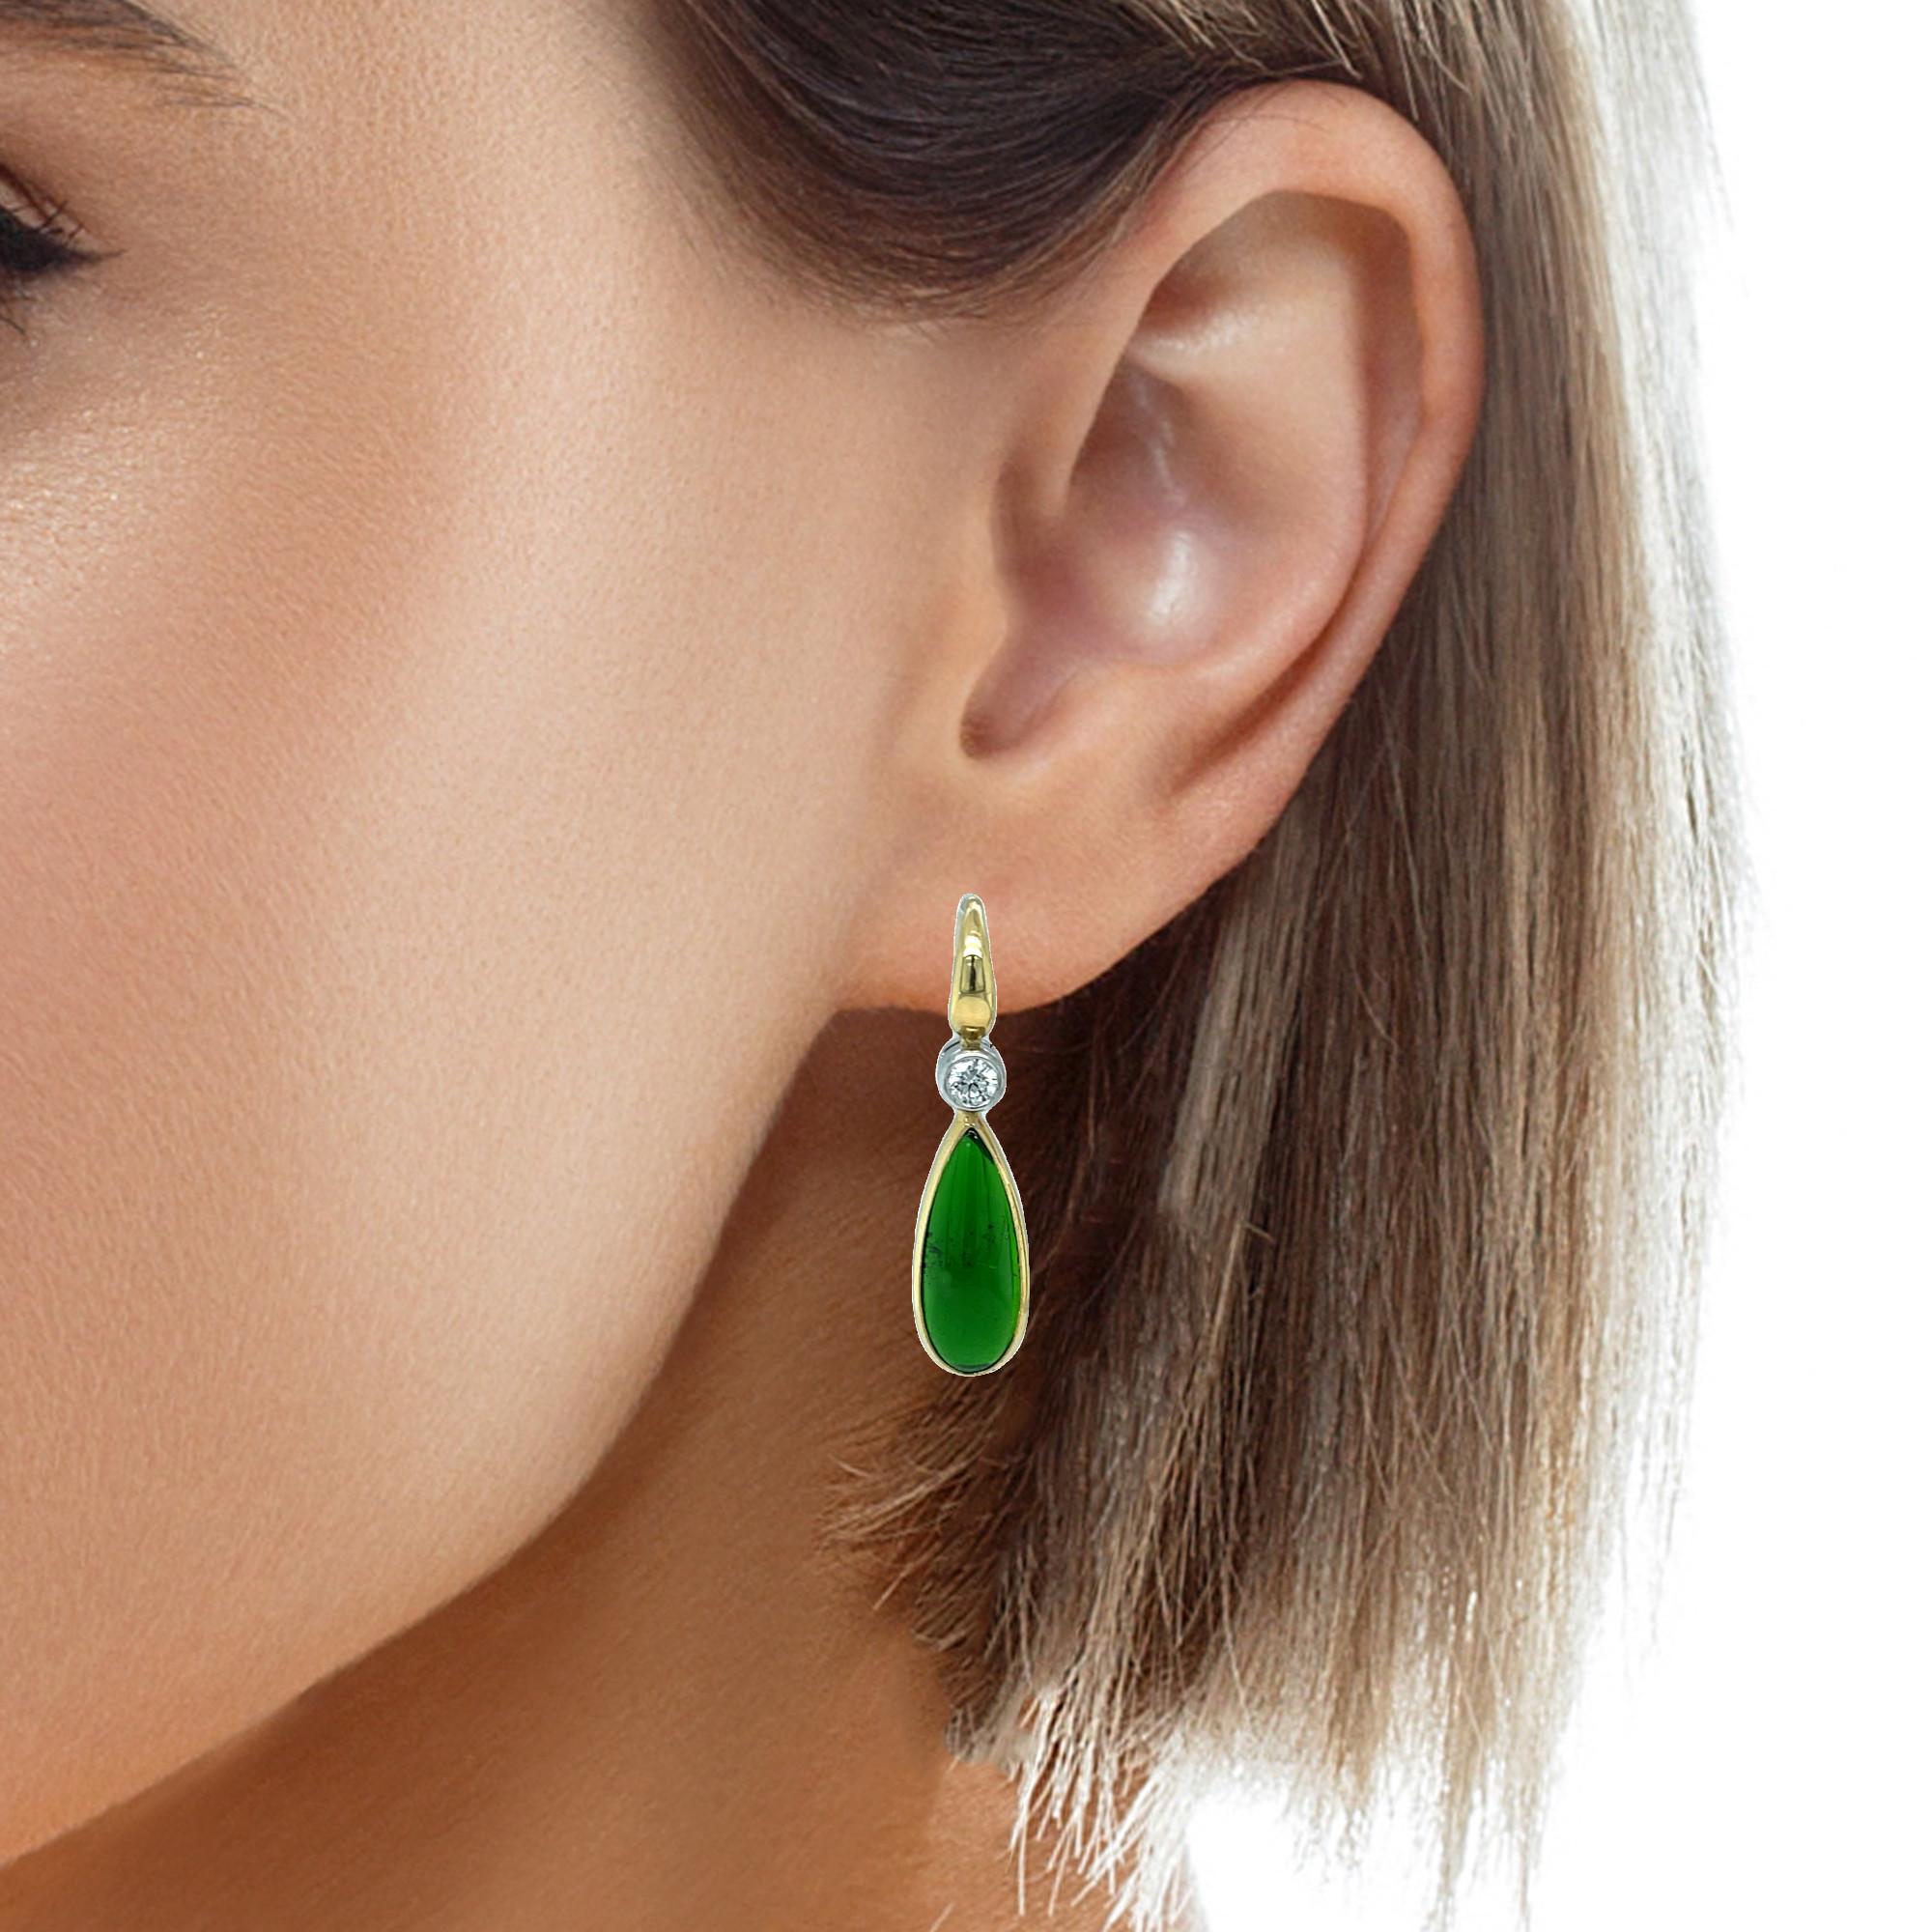 8.26 Carat Total Chrome Diopside Dangle Earrings in Gold with Diamonds For Sale 2